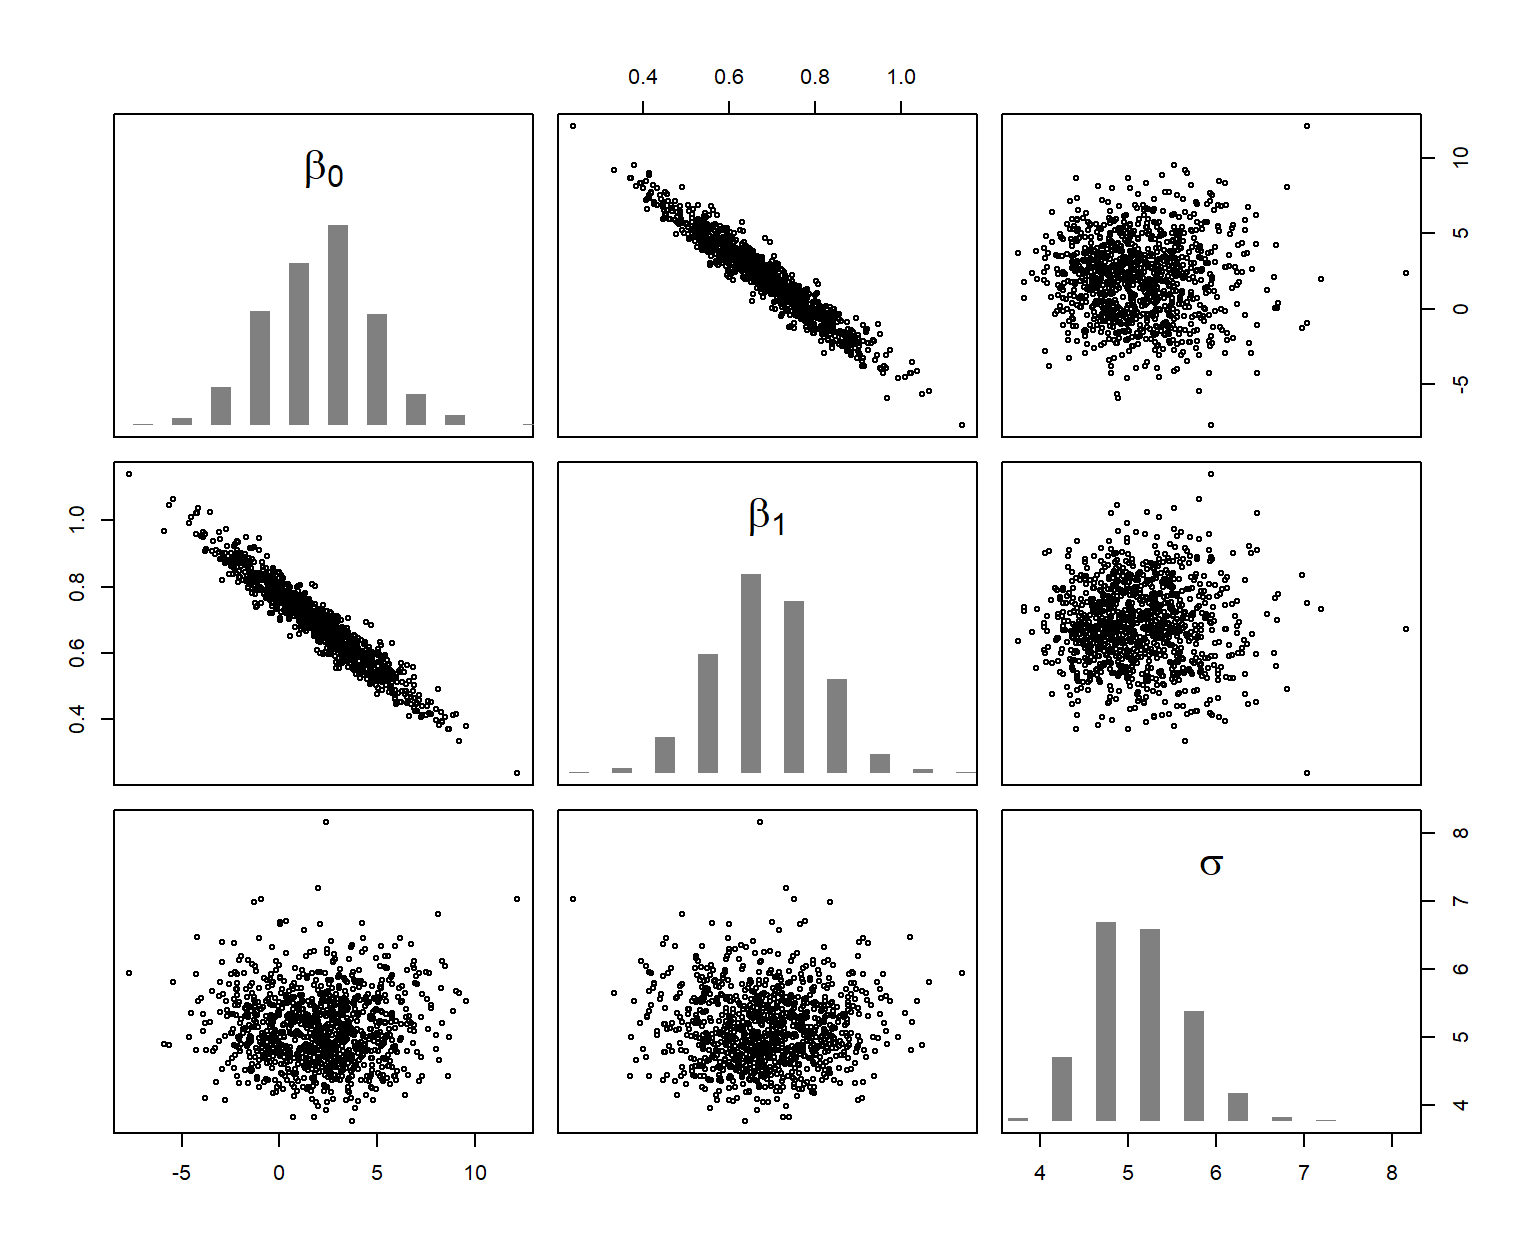 Joint (scatterplots) and marginal (histograms) posterior distribution of the model parameters. The six scatterplots show, using different axes, the three-dimensional cloud of 1000 simulations from the joint posterior distribution of the three parameters.